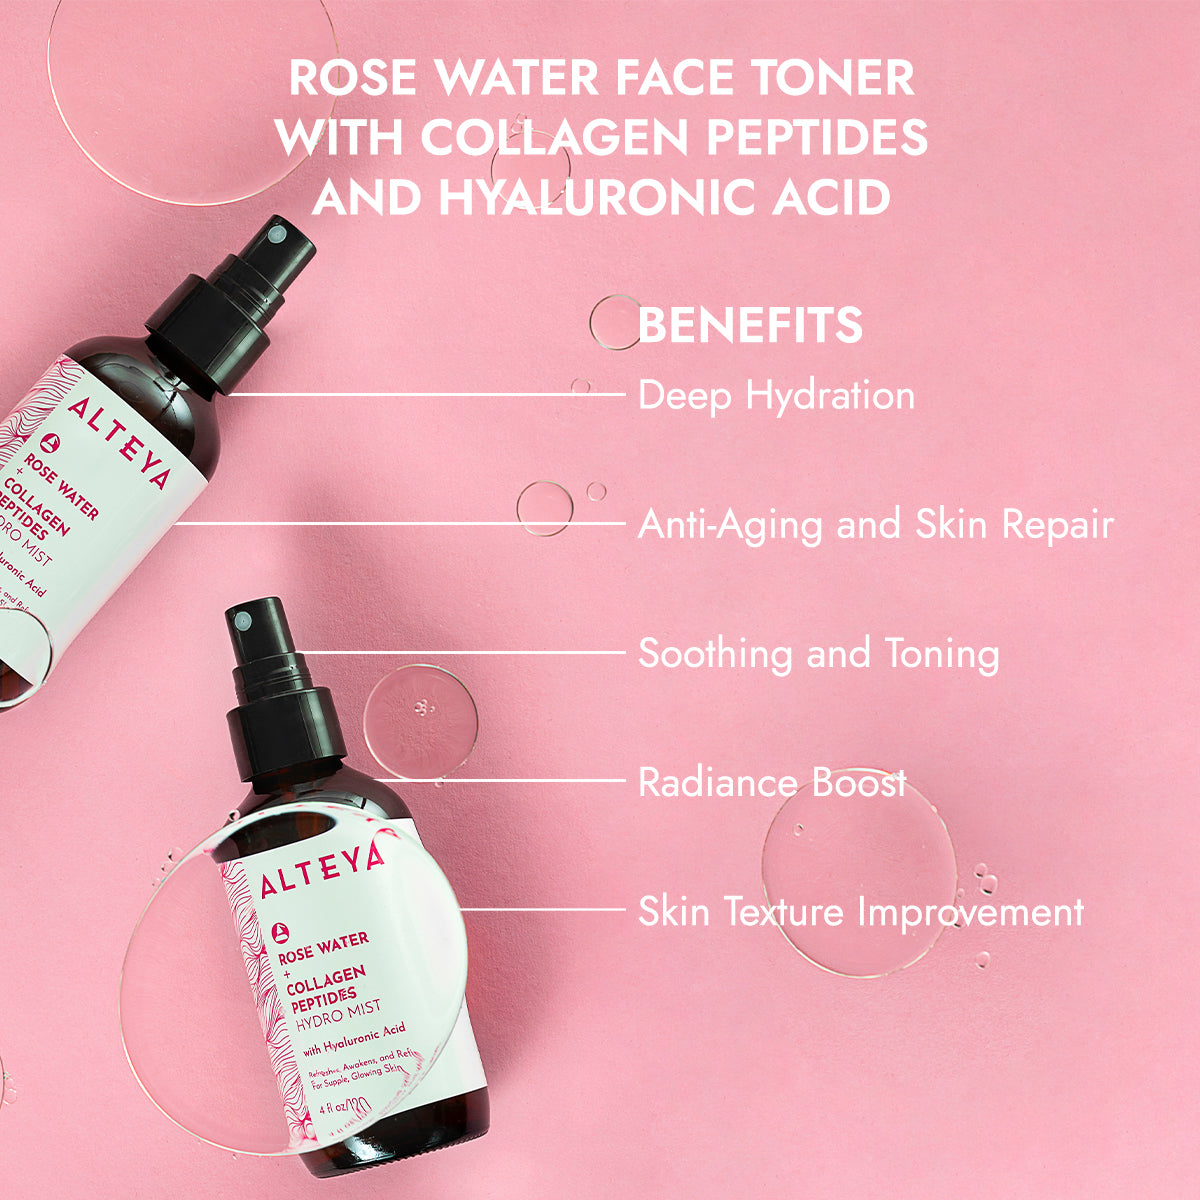 Rose Water Face Toner with Collagen Peptides and Hyaluronic Acid for a dewy-looking complexion.